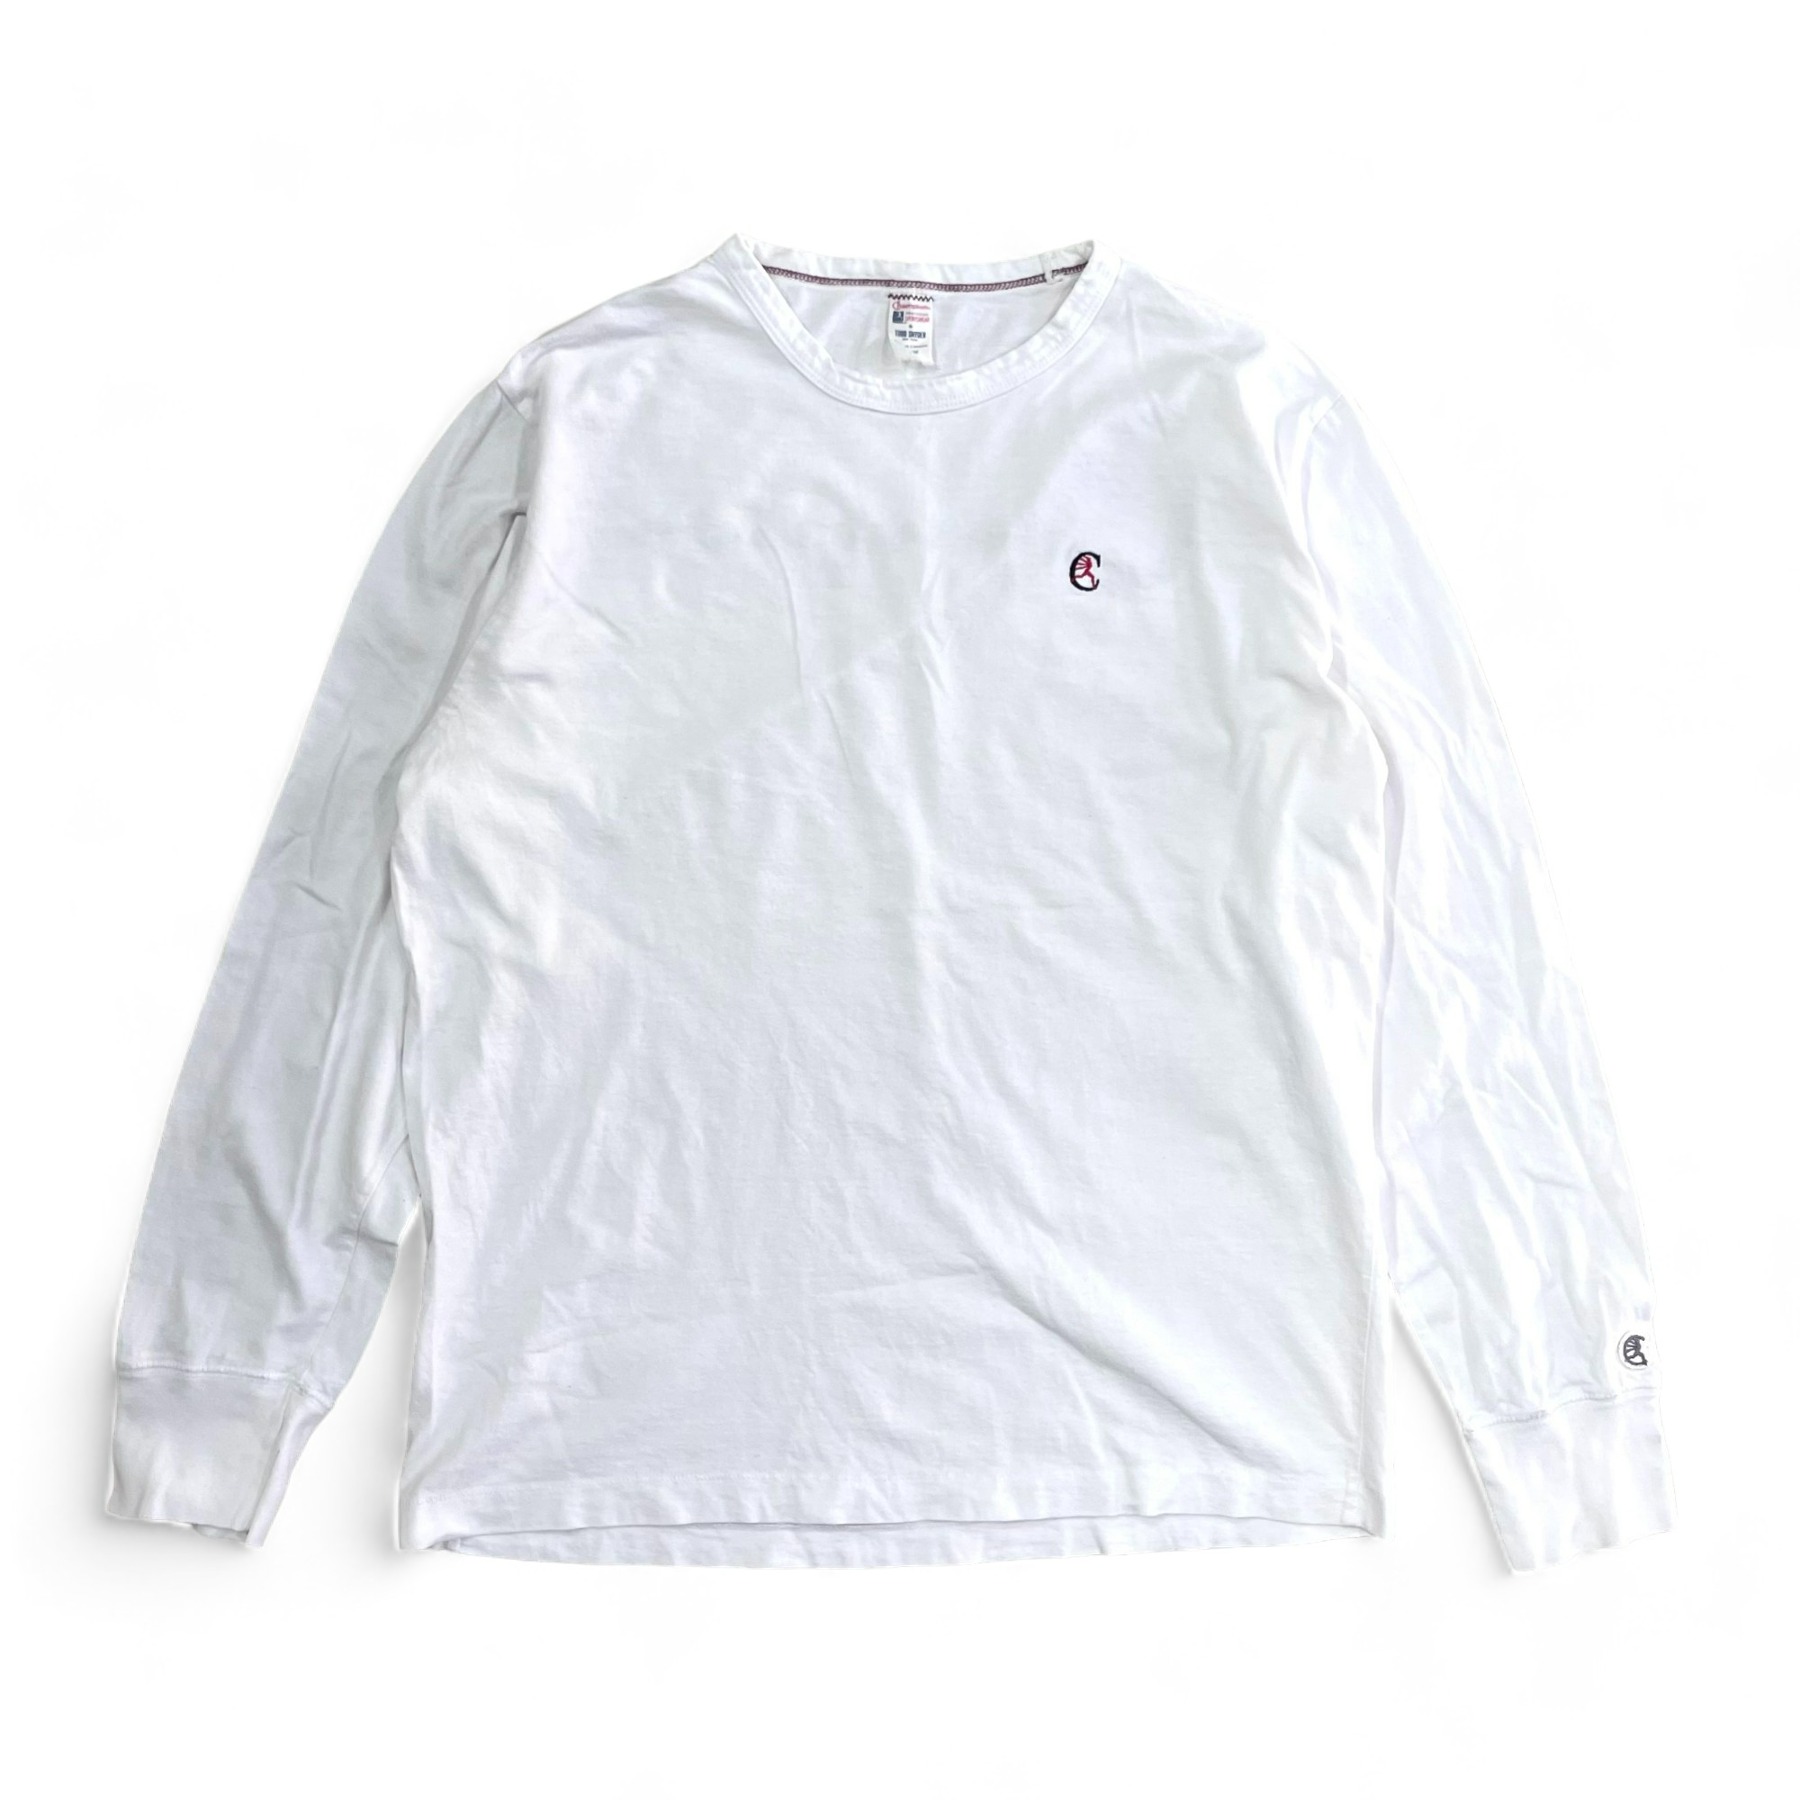 Champion + Todd Snyder Long Sleeve (Made in CANADA) - L